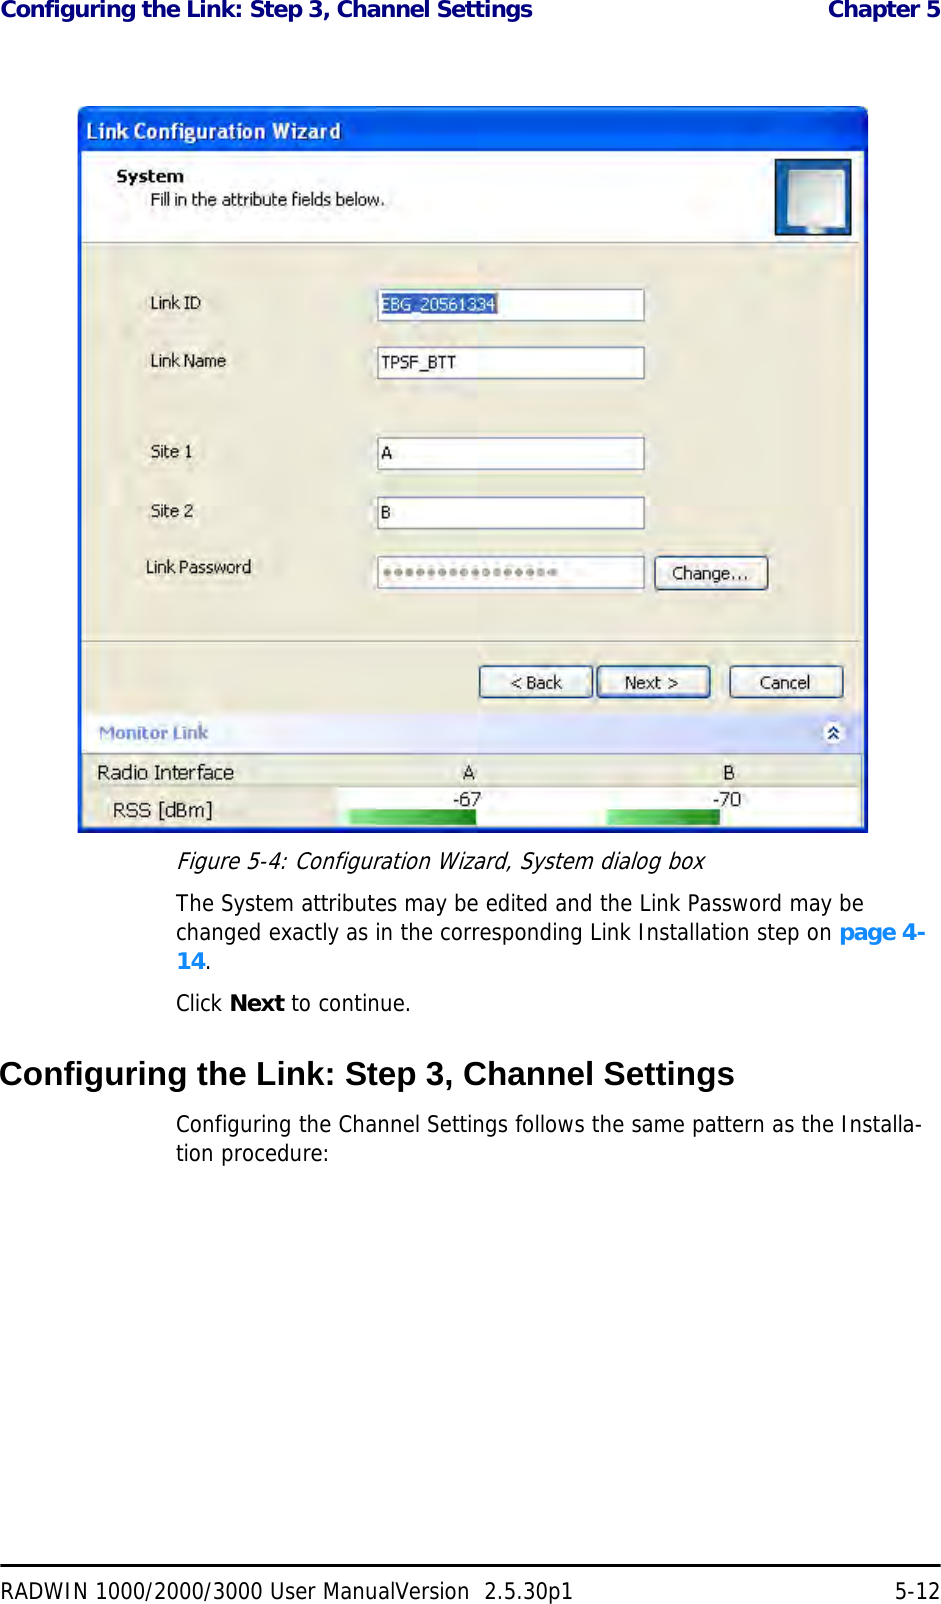 Configuring the Link: Step 3, Channel Settings  Chapter 5RADWIN 1000/2000/3000 User ManualVersion  2.5.30p1 5-12Figure 5-4: Configuration Wizard, System dialog boxThe System attributes may be edited and the Link Password may be changed exactly as in the corresponding Link Installation step on page 4-14.Click Next to continue.Configuring the Link: Step 3, Channel SettingsConfiguring the Channel Settings follows the same pattern as the Installa-tion procedure: